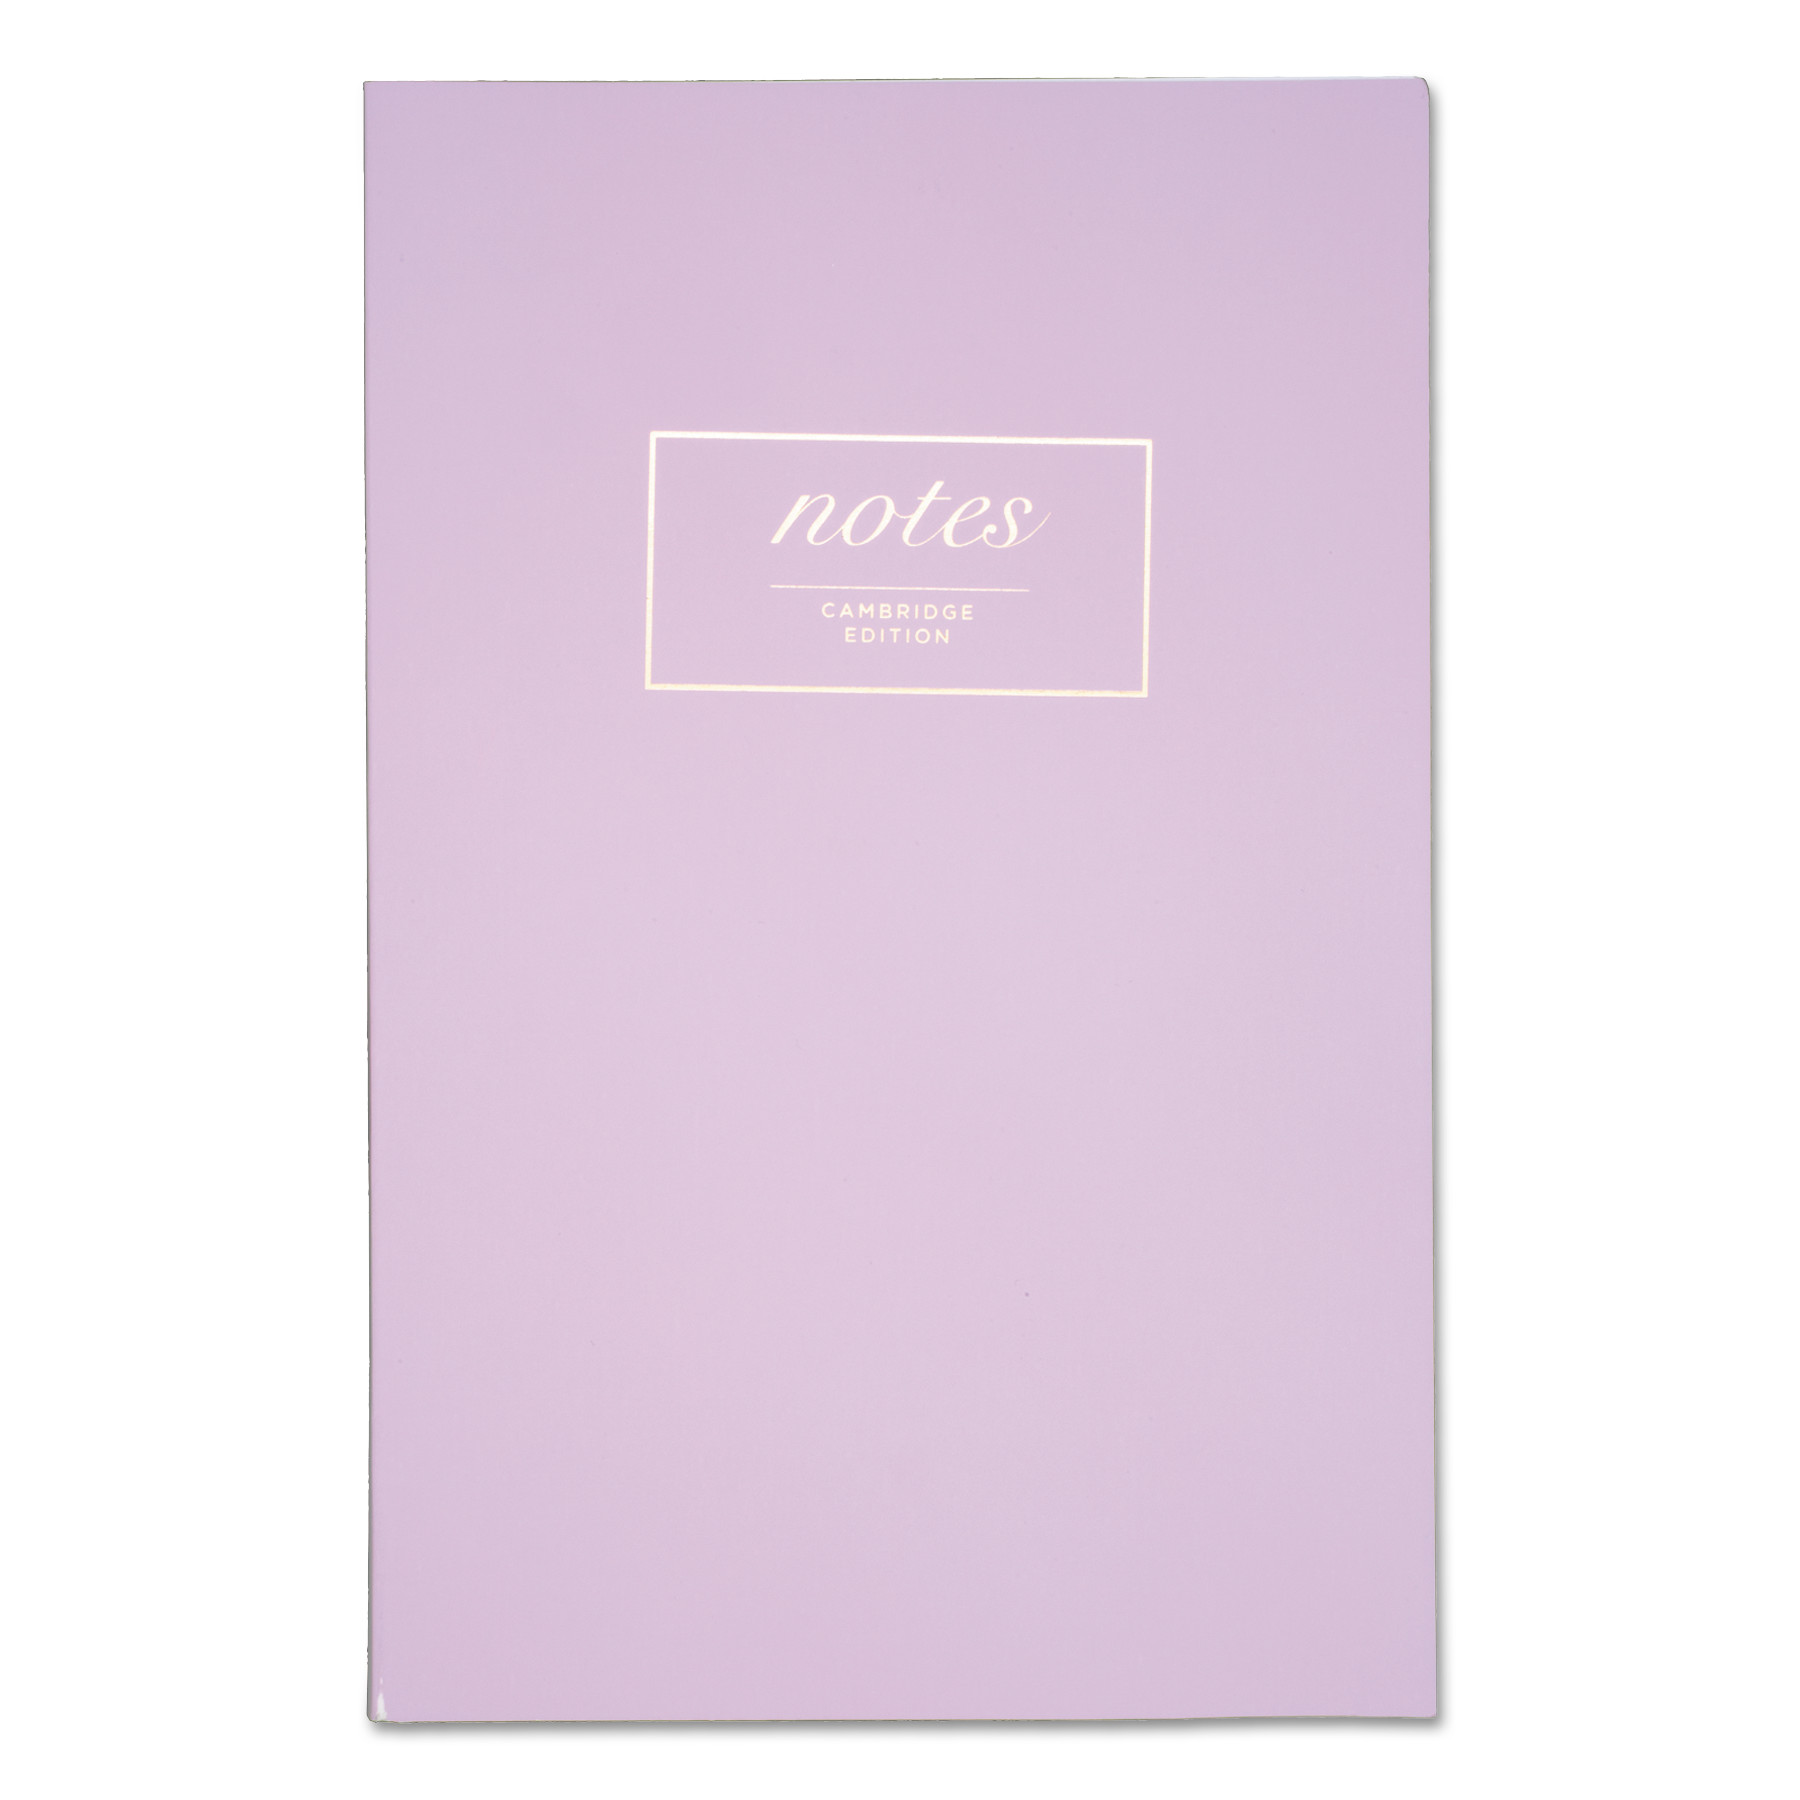  Cambridge 59441 Workstyle Notebook, 1 Subject, Wide/Legal Rule, Lavender Cover, 8.5 x 5.5, 80 Sheets (MEA59441) 